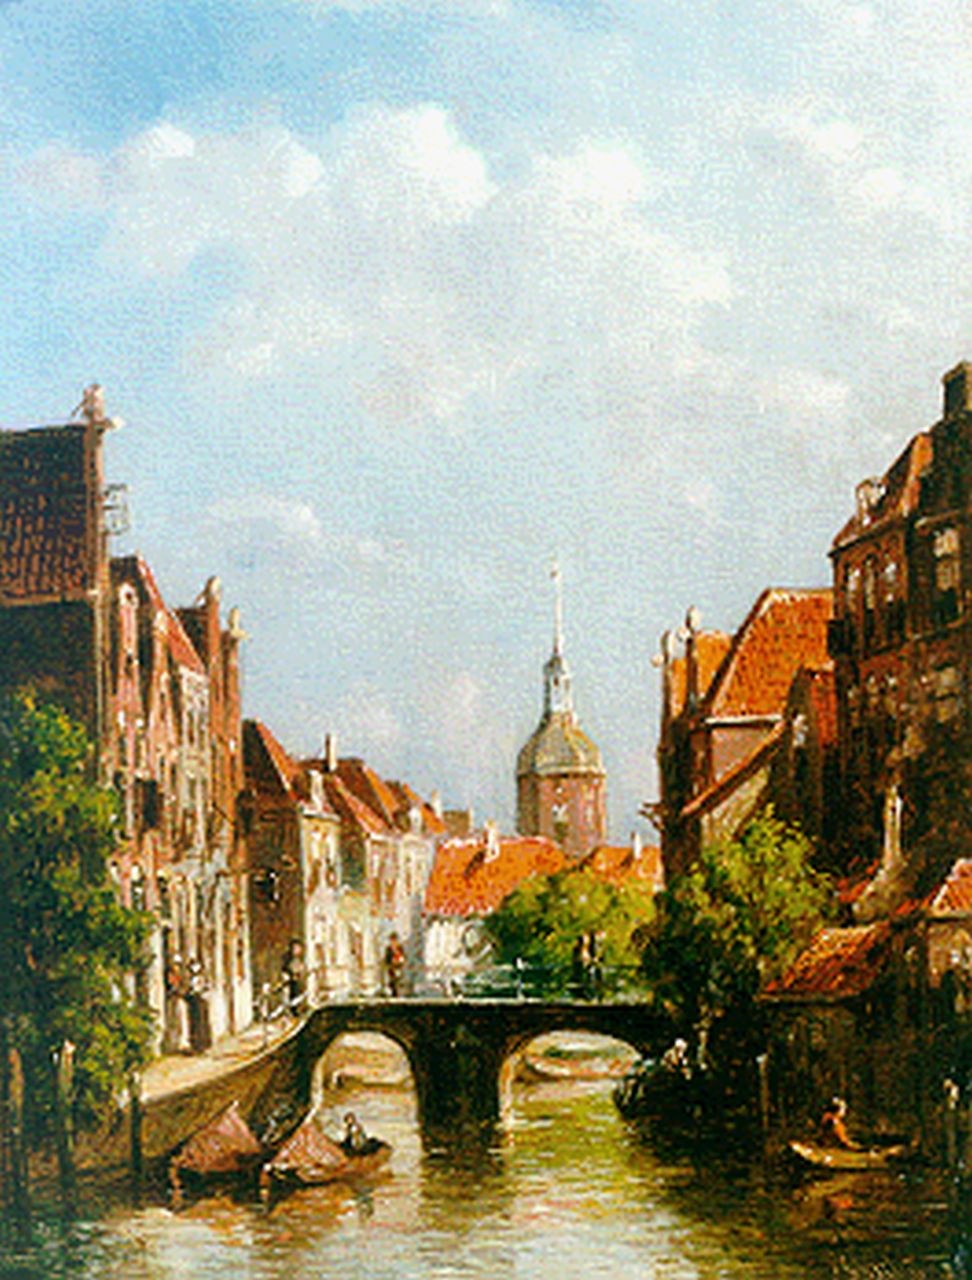 Vertin P.G.  | Petrus Gerardus Vertin, A view of Dordrecht, oil on panel 24.7 x 18.6 cm, signed l.r. and dated 8(?)